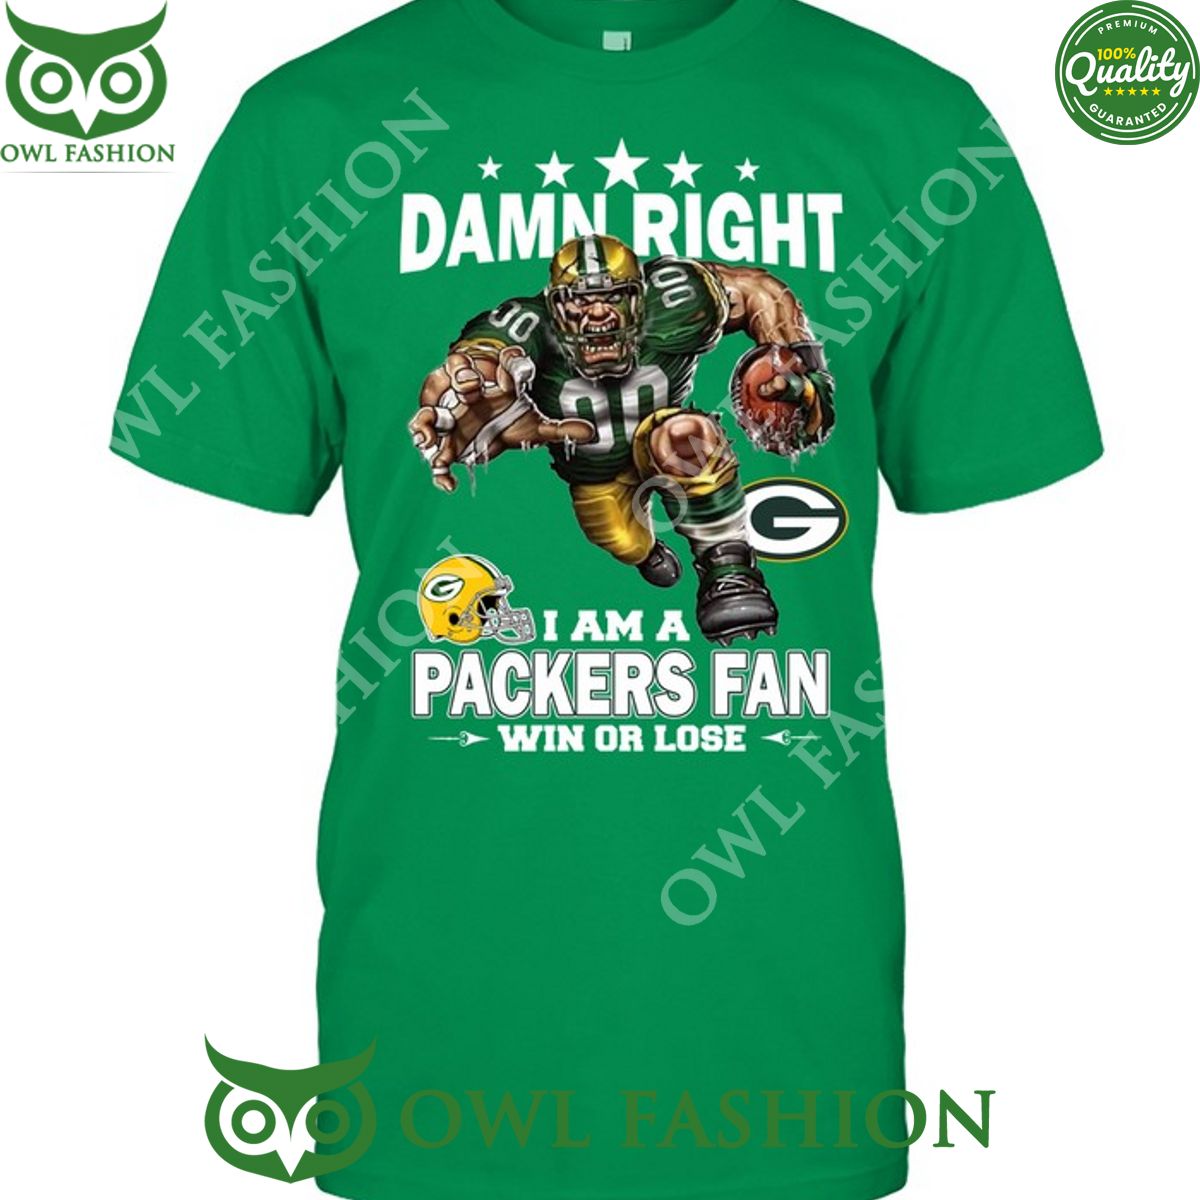 Damn Right Green Bay Packers NFL Fan Win or lose t shirt